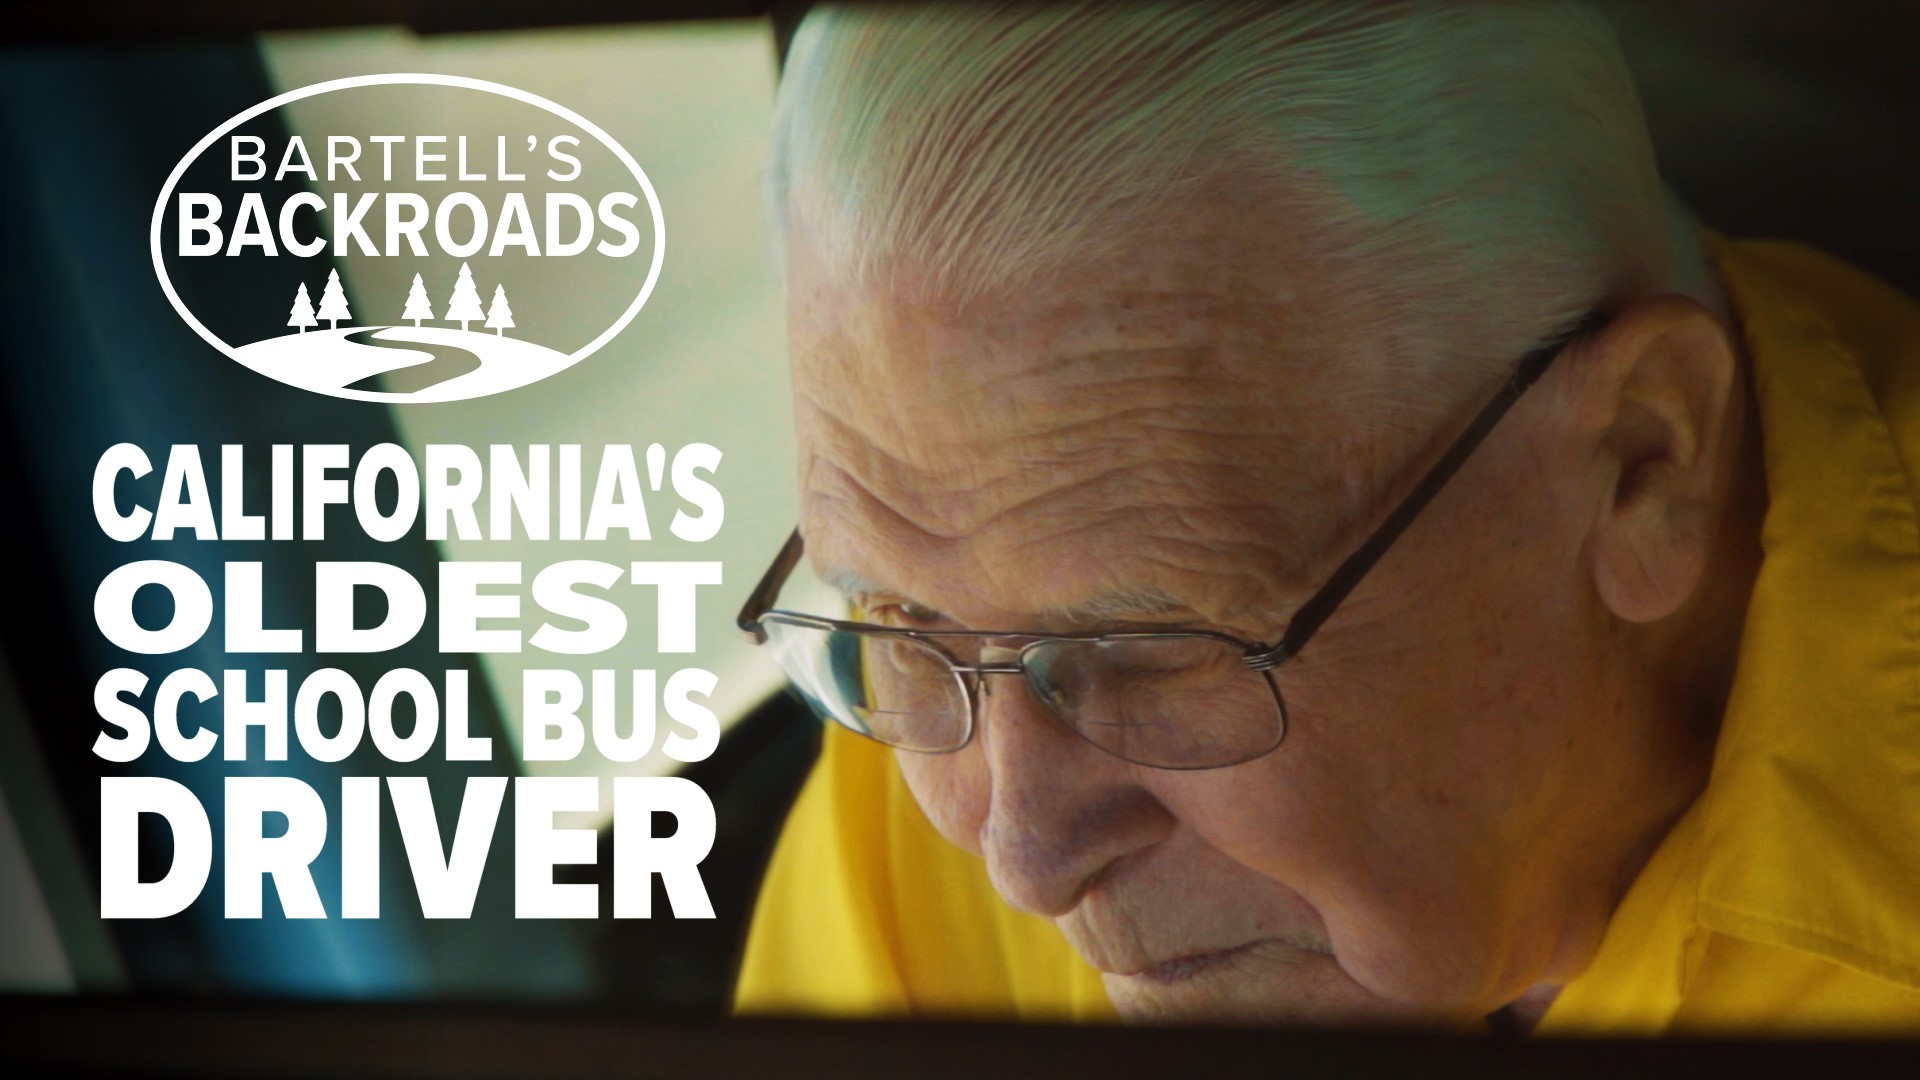 A feel-good story: Spending 70 years on a school bus would be a nightmare for most people, but not for Phil Gardner. John Bartell caught up with him, and learned what it's like to spend a lifetime living your dream.